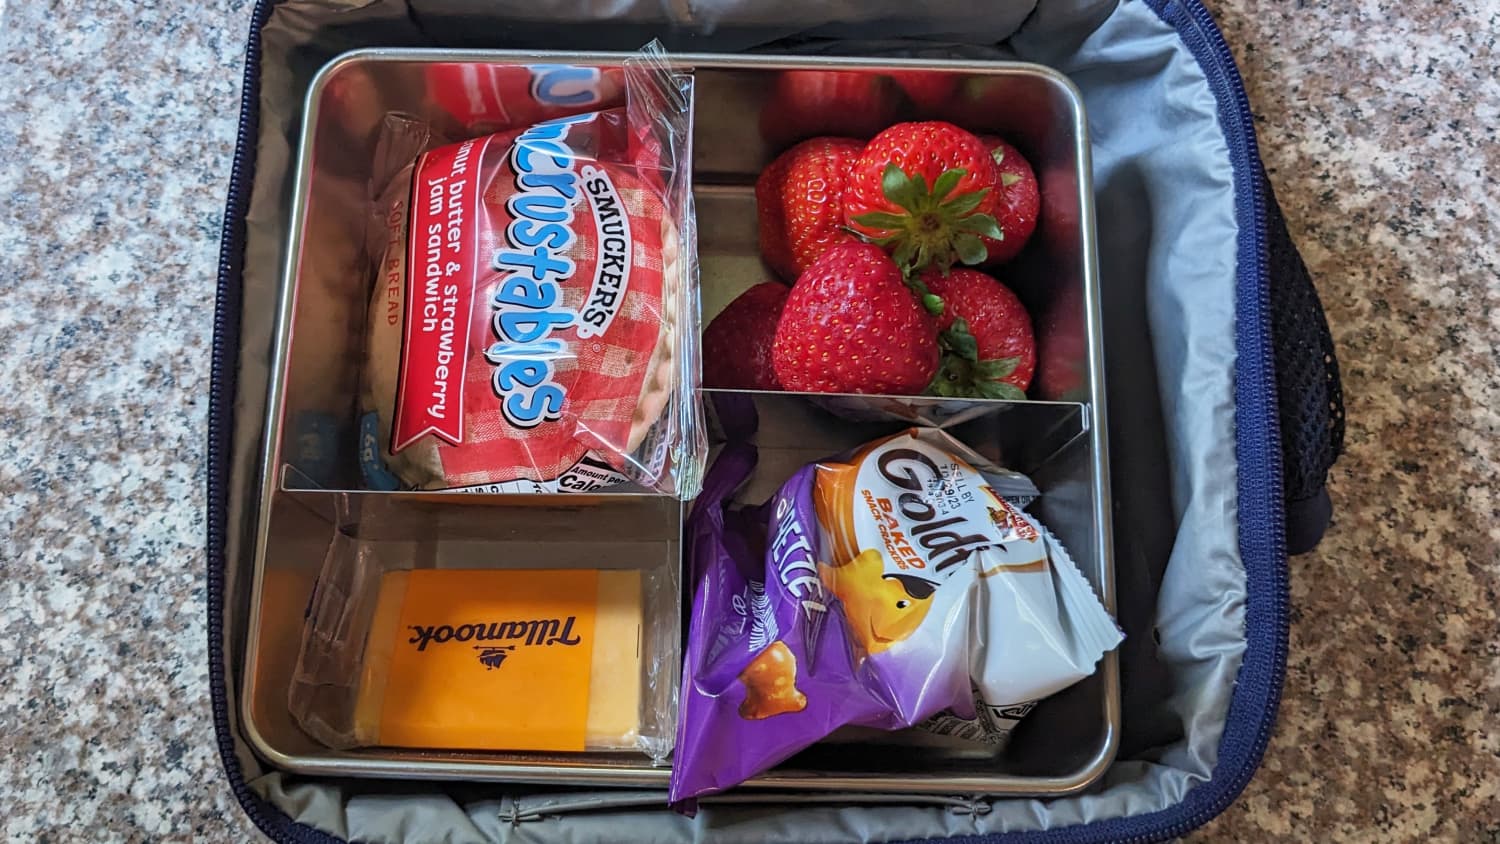 Customized Kids Lunch Box – All Things Euphoria